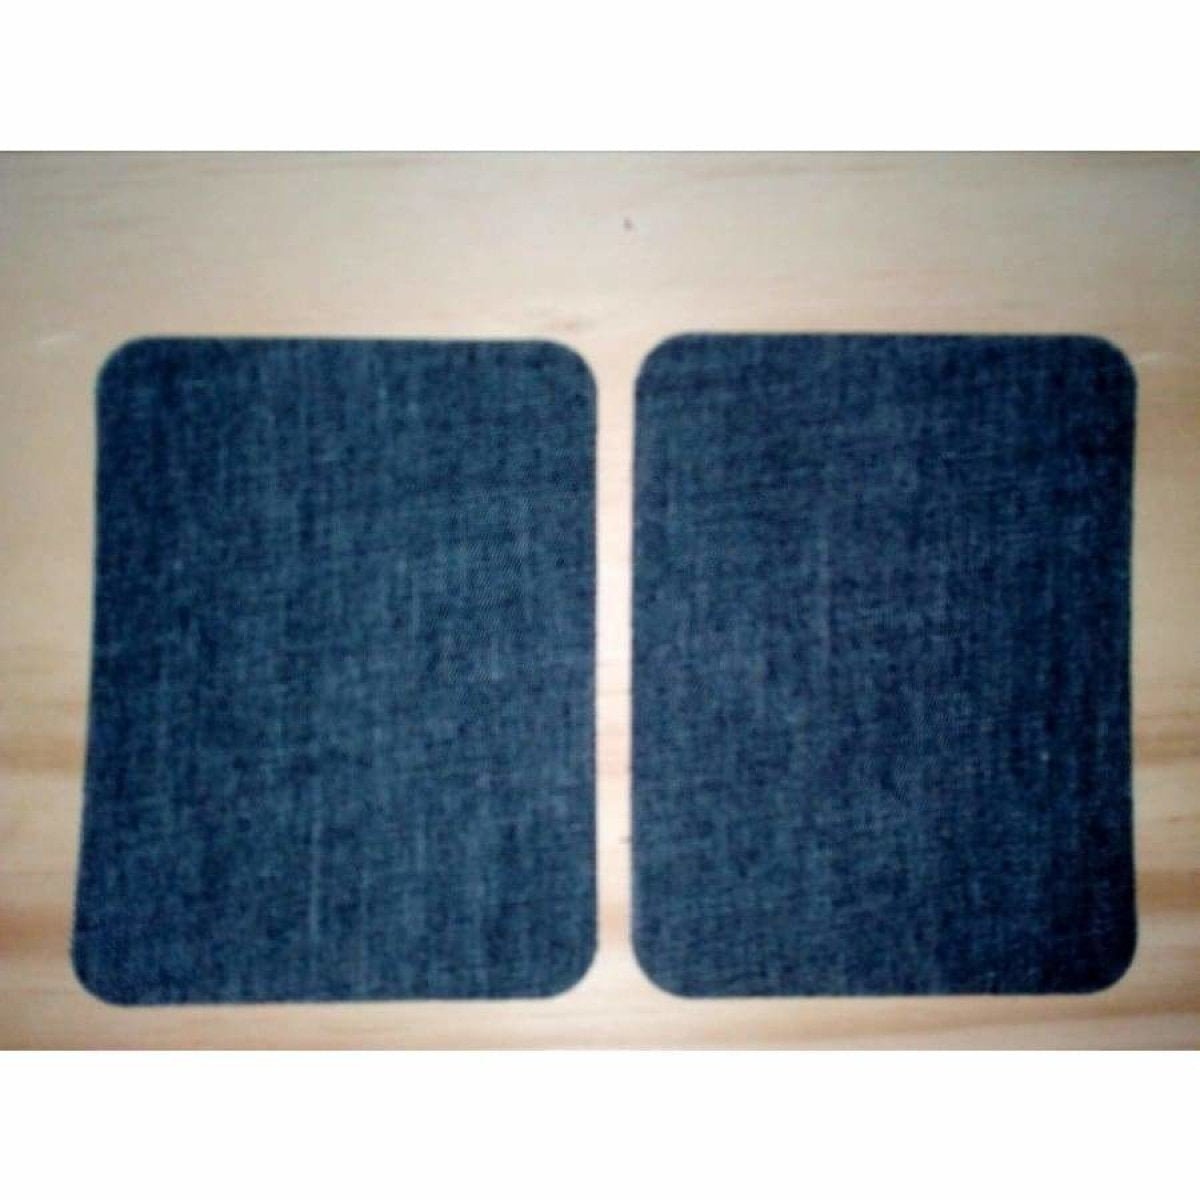 2pcs Iron-on Fabric Blue Black Denim Jeans Clothing Jacket Patch Patches Repair Sewing Shapes - 12.5x9.5cm Black - - Asia Sell